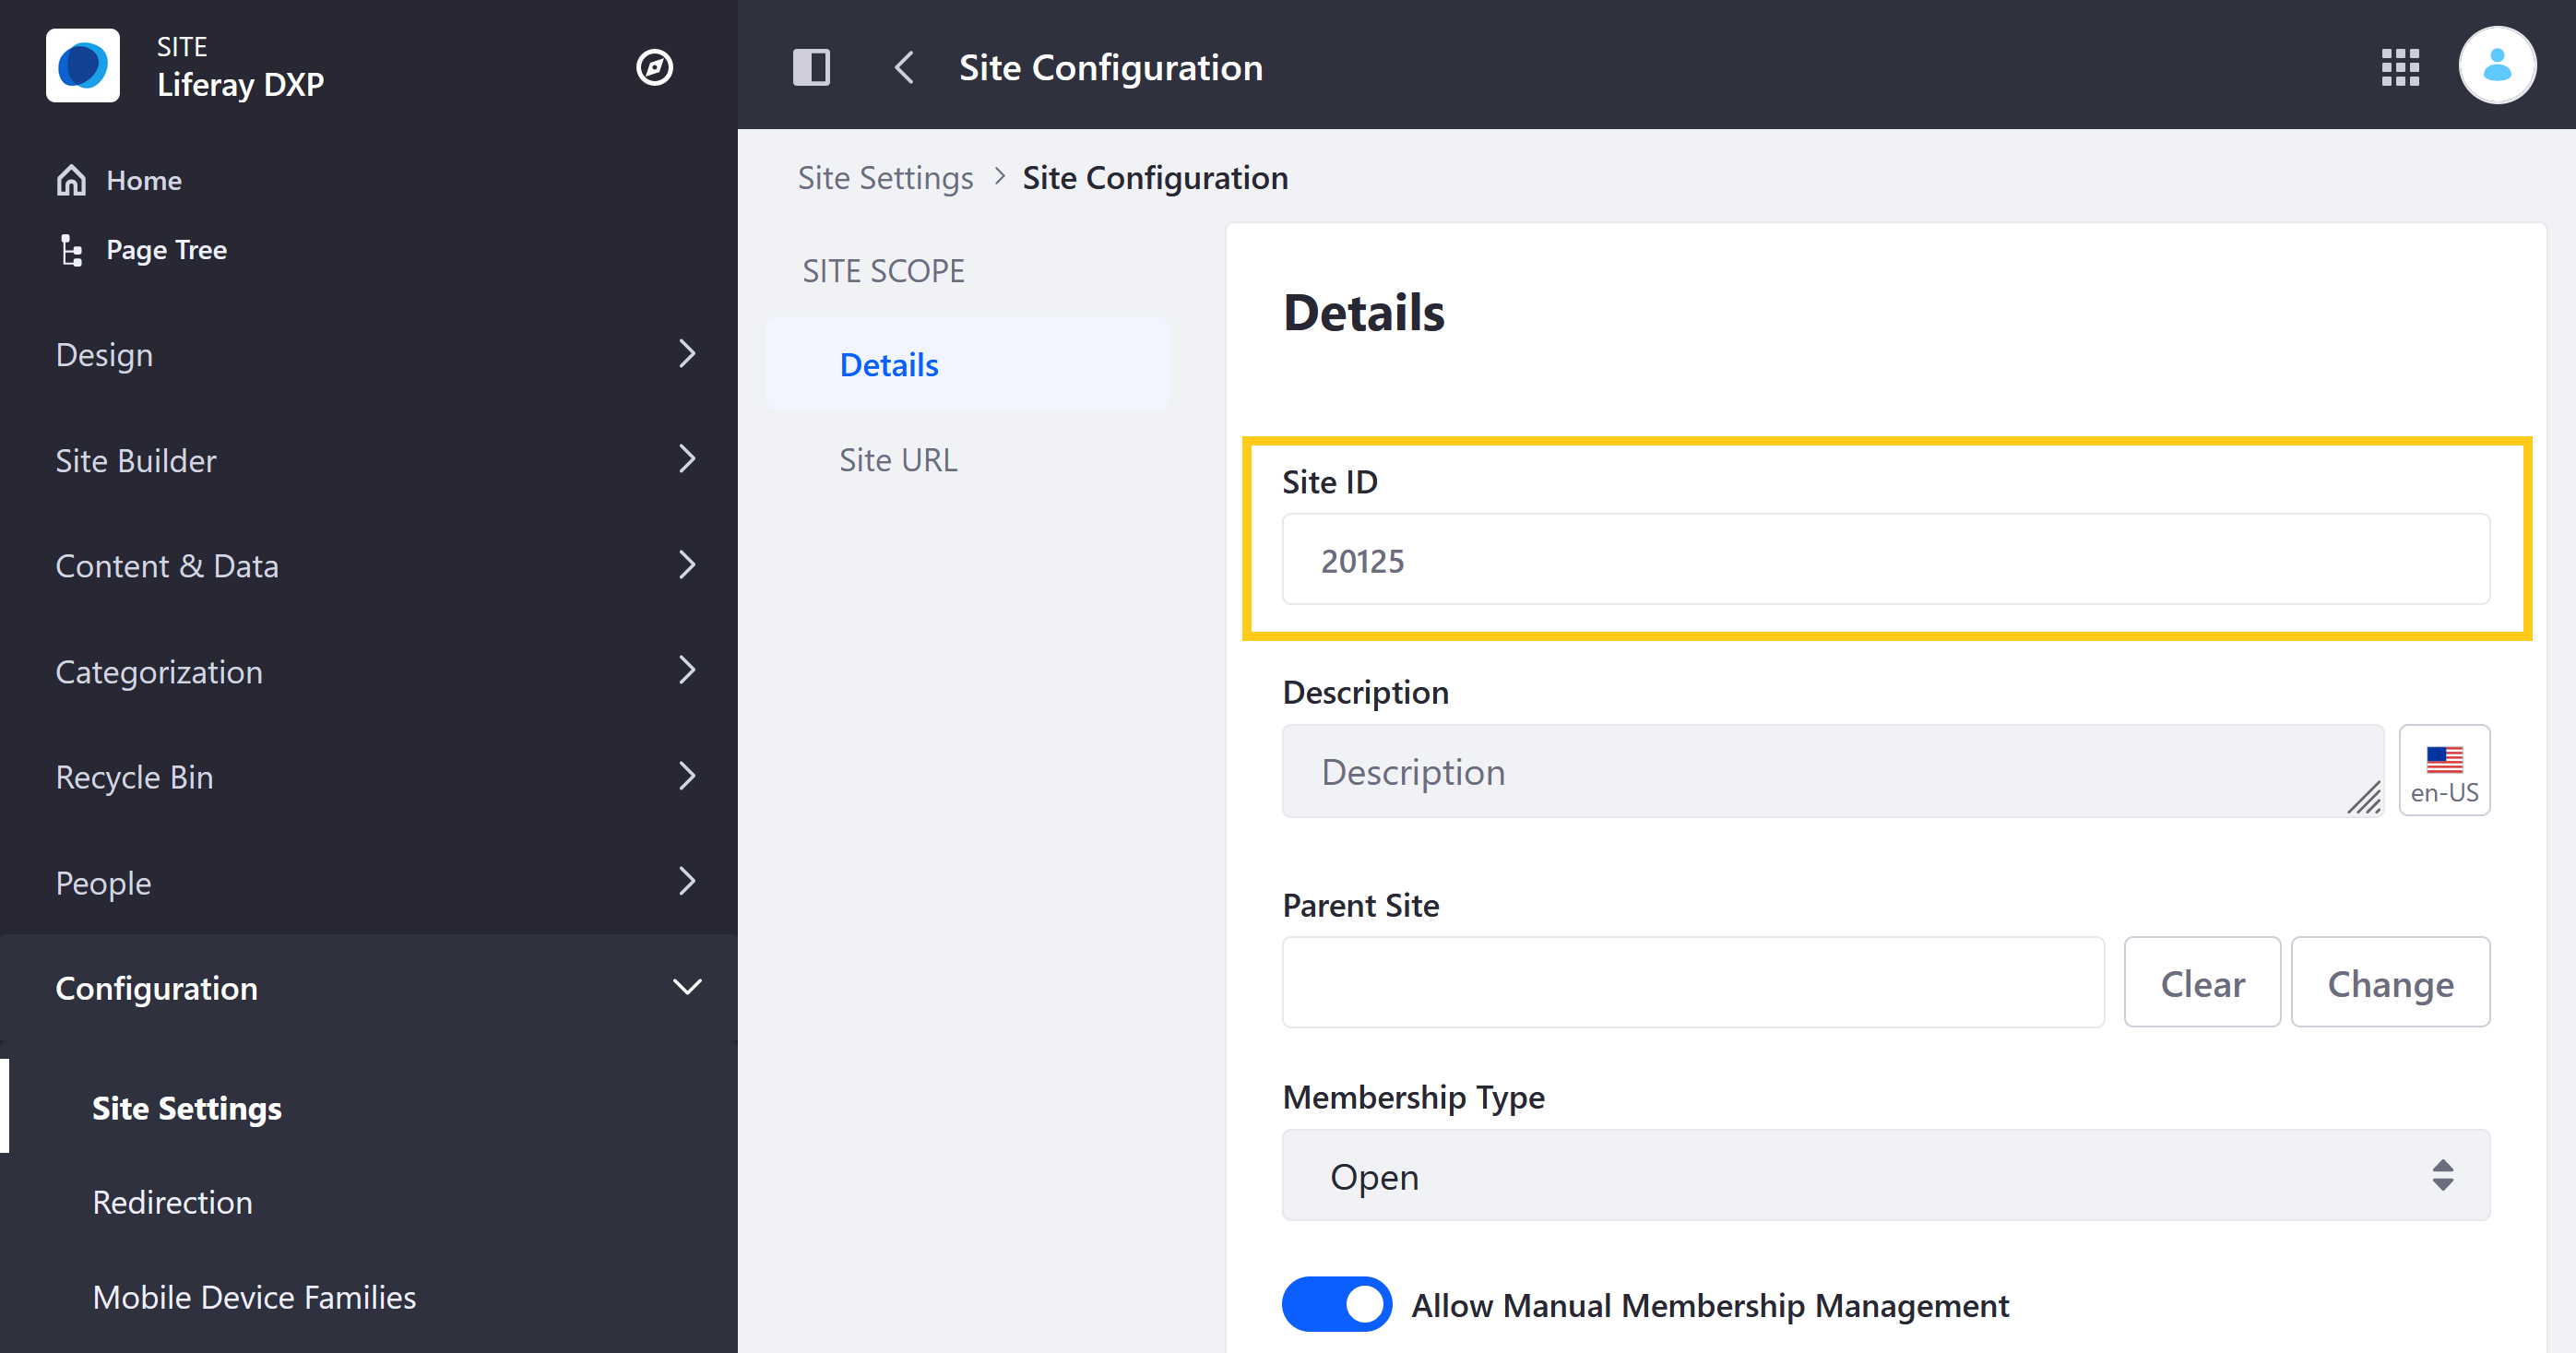 Find the Site ID under Site Configuration settings.